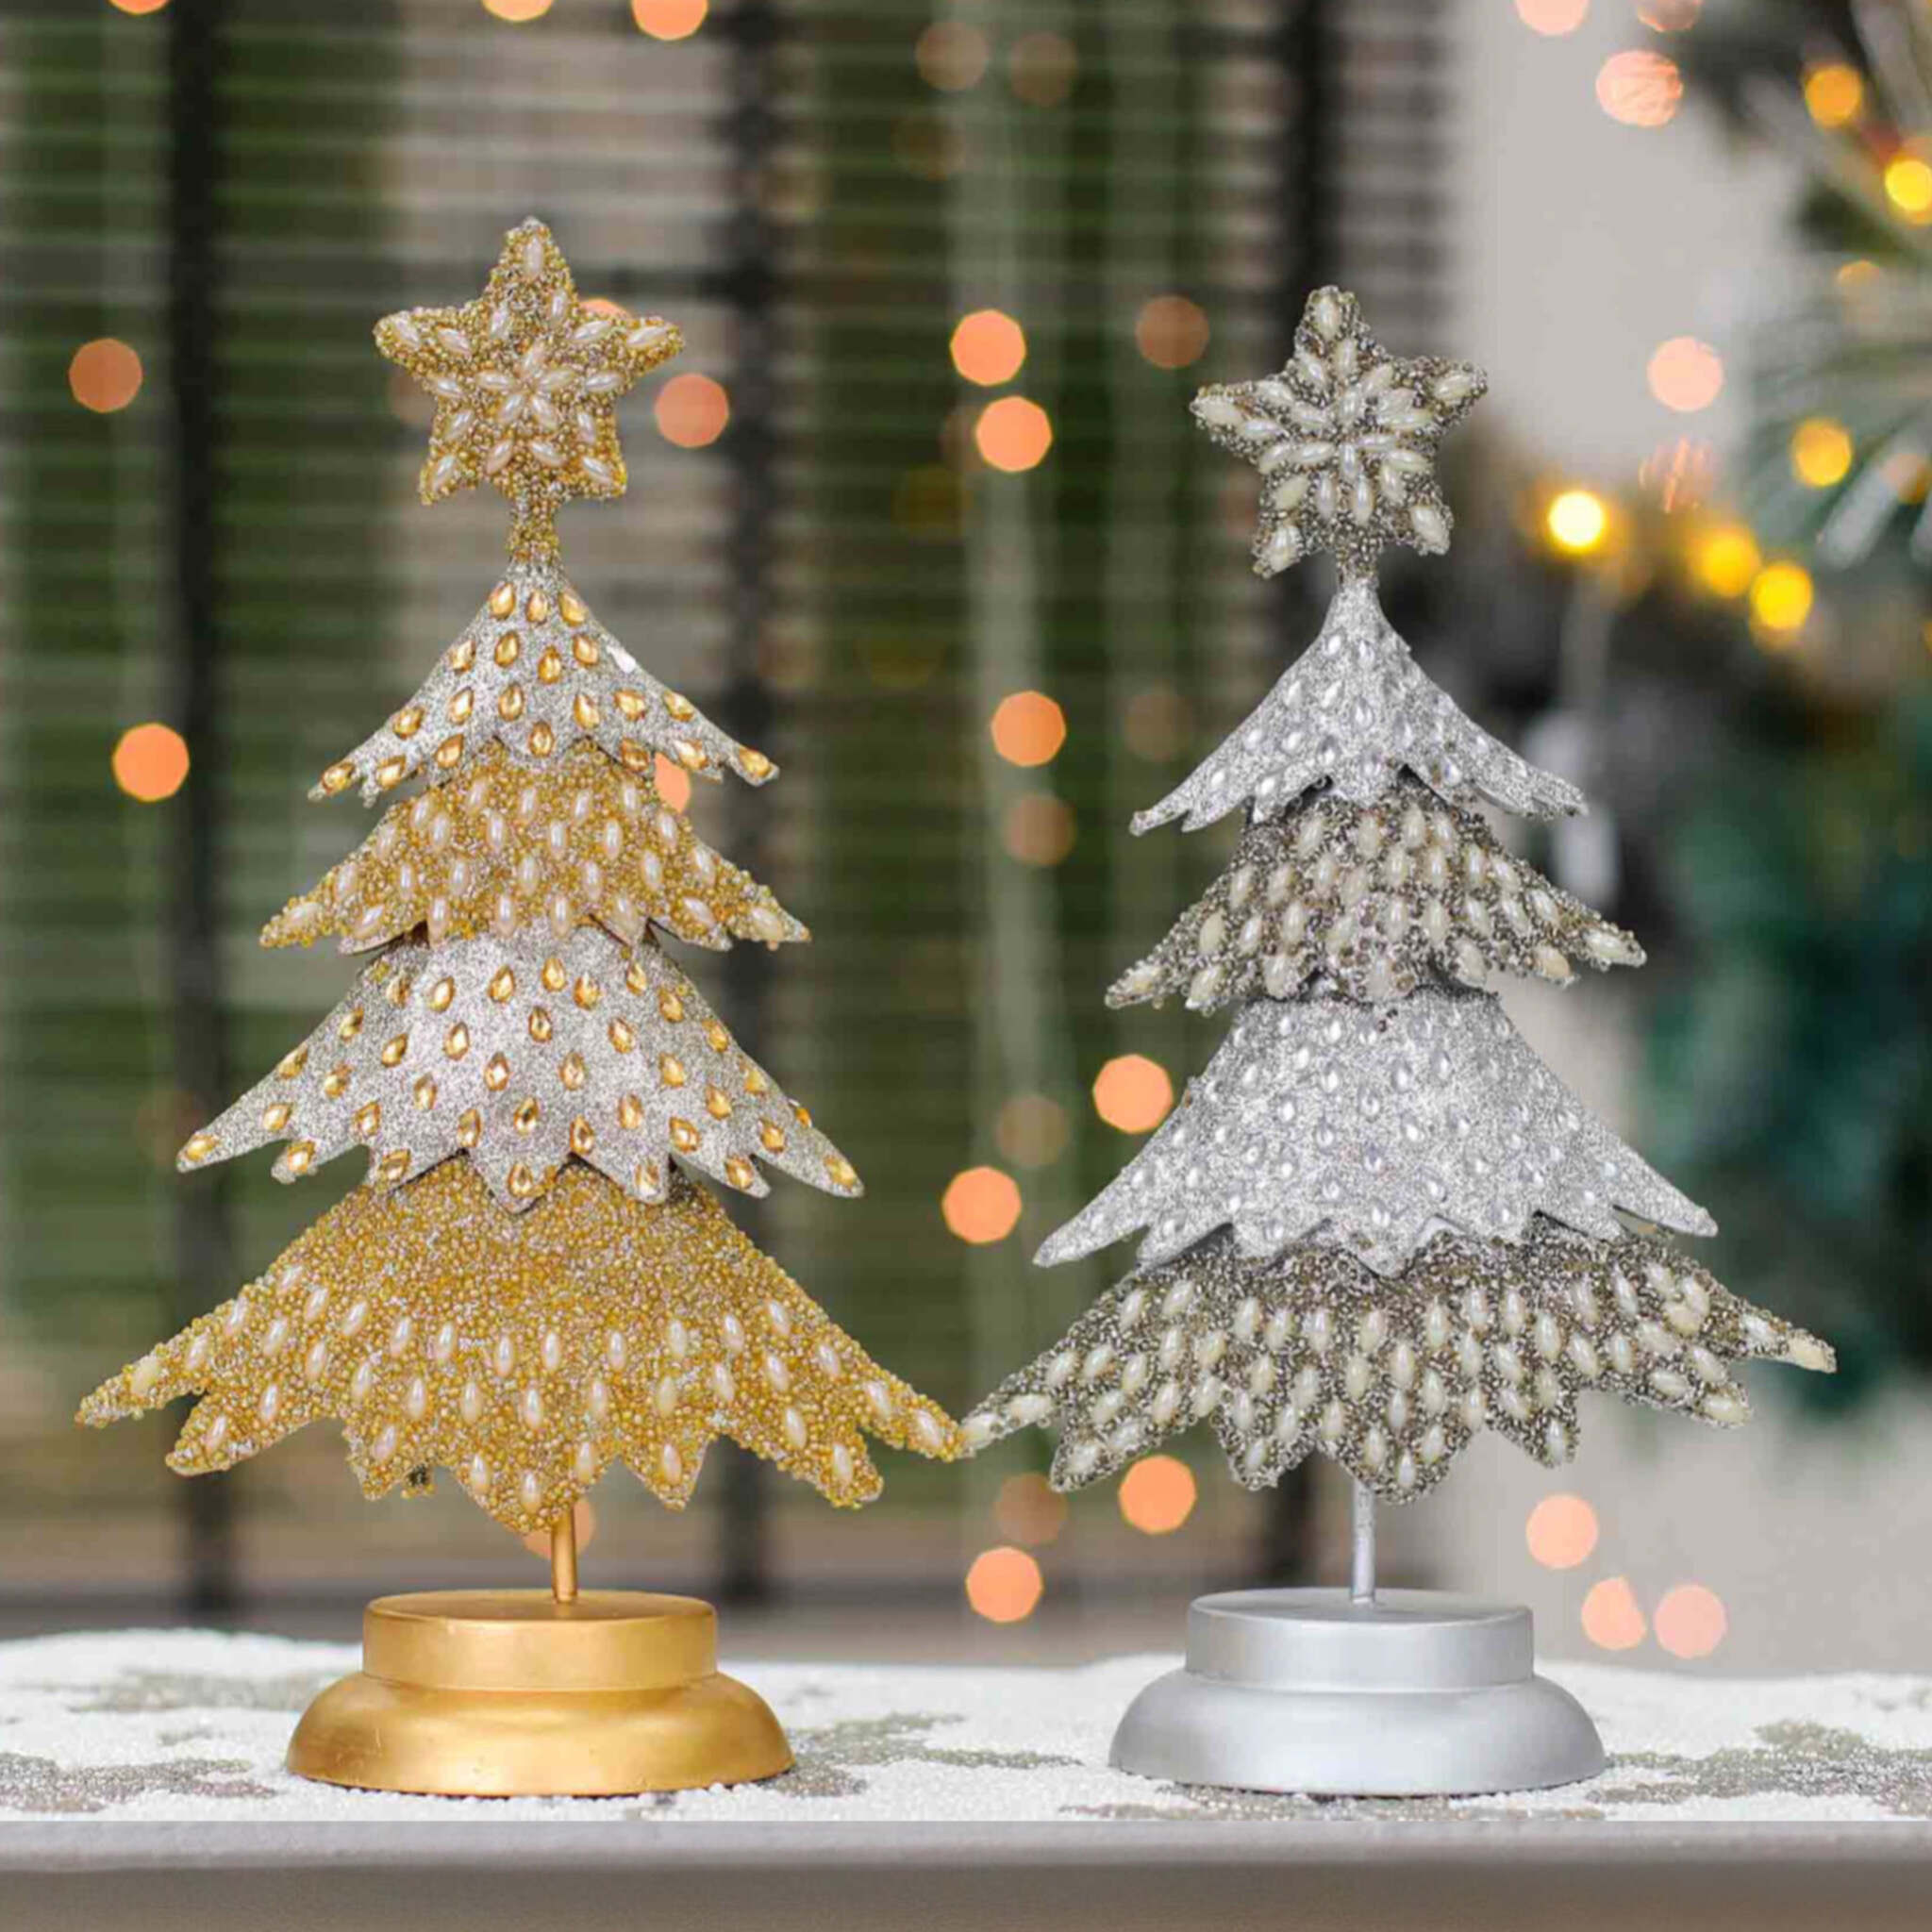 Whoville Christmas Trees in Silver, Gold & White, Set of 2